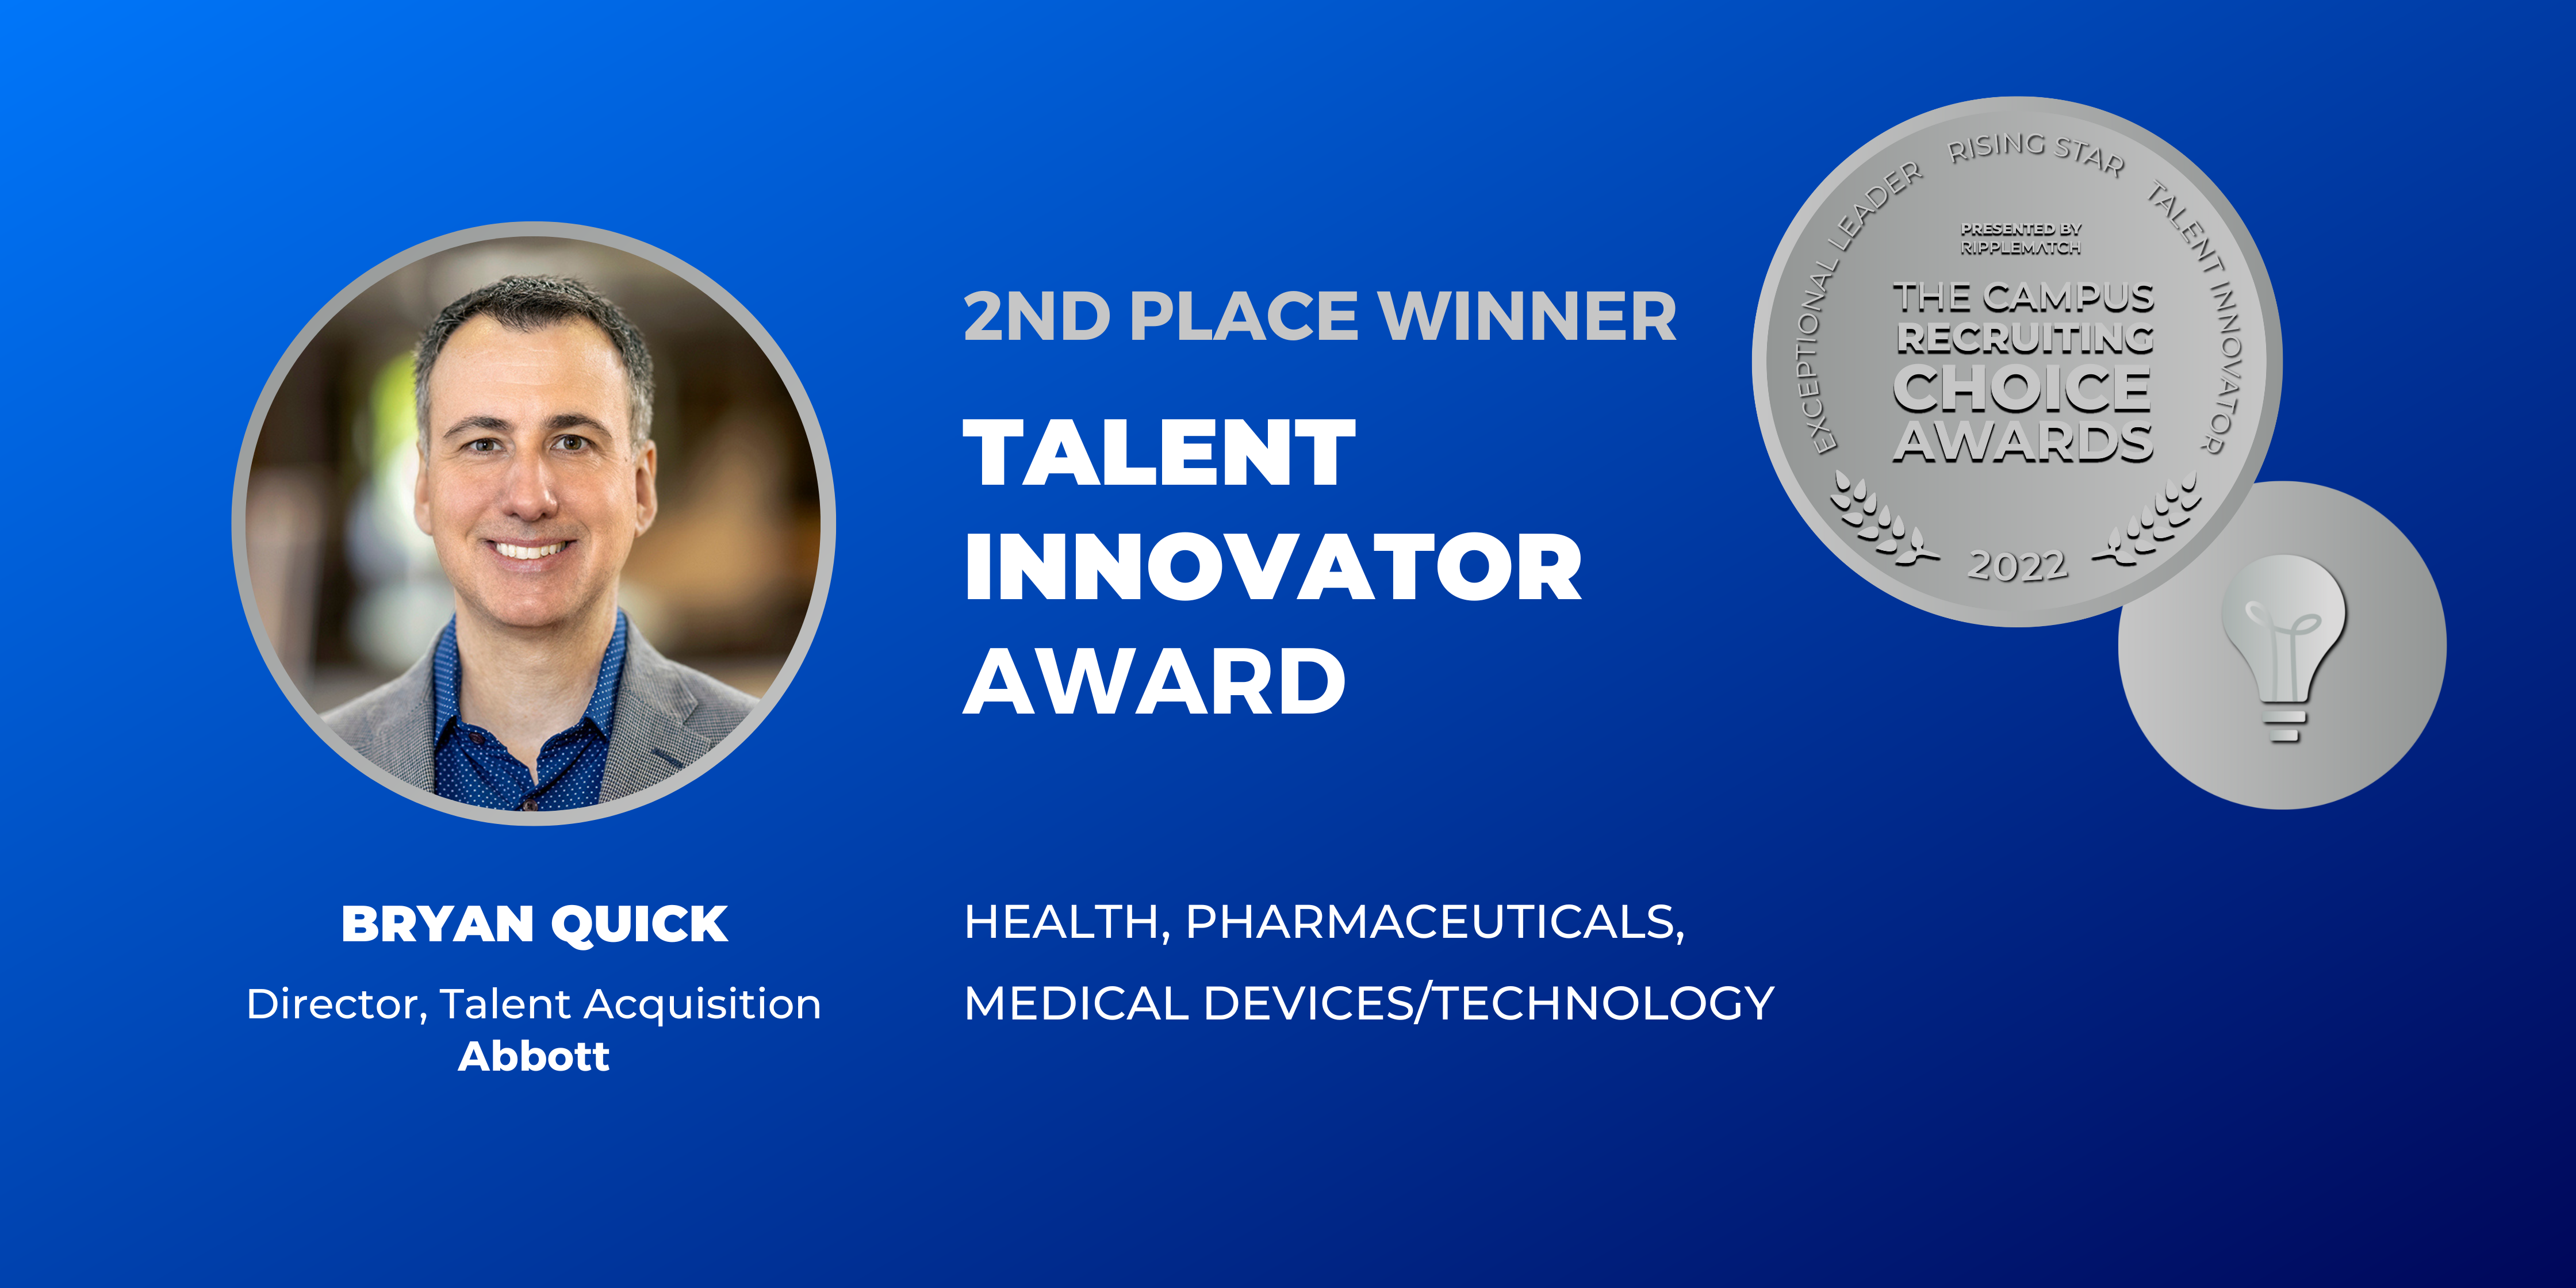 TALENT INNOVATOR - 2nd place - Health, Pharmaceuticals, Medical Devices Technology - Bryan Quick